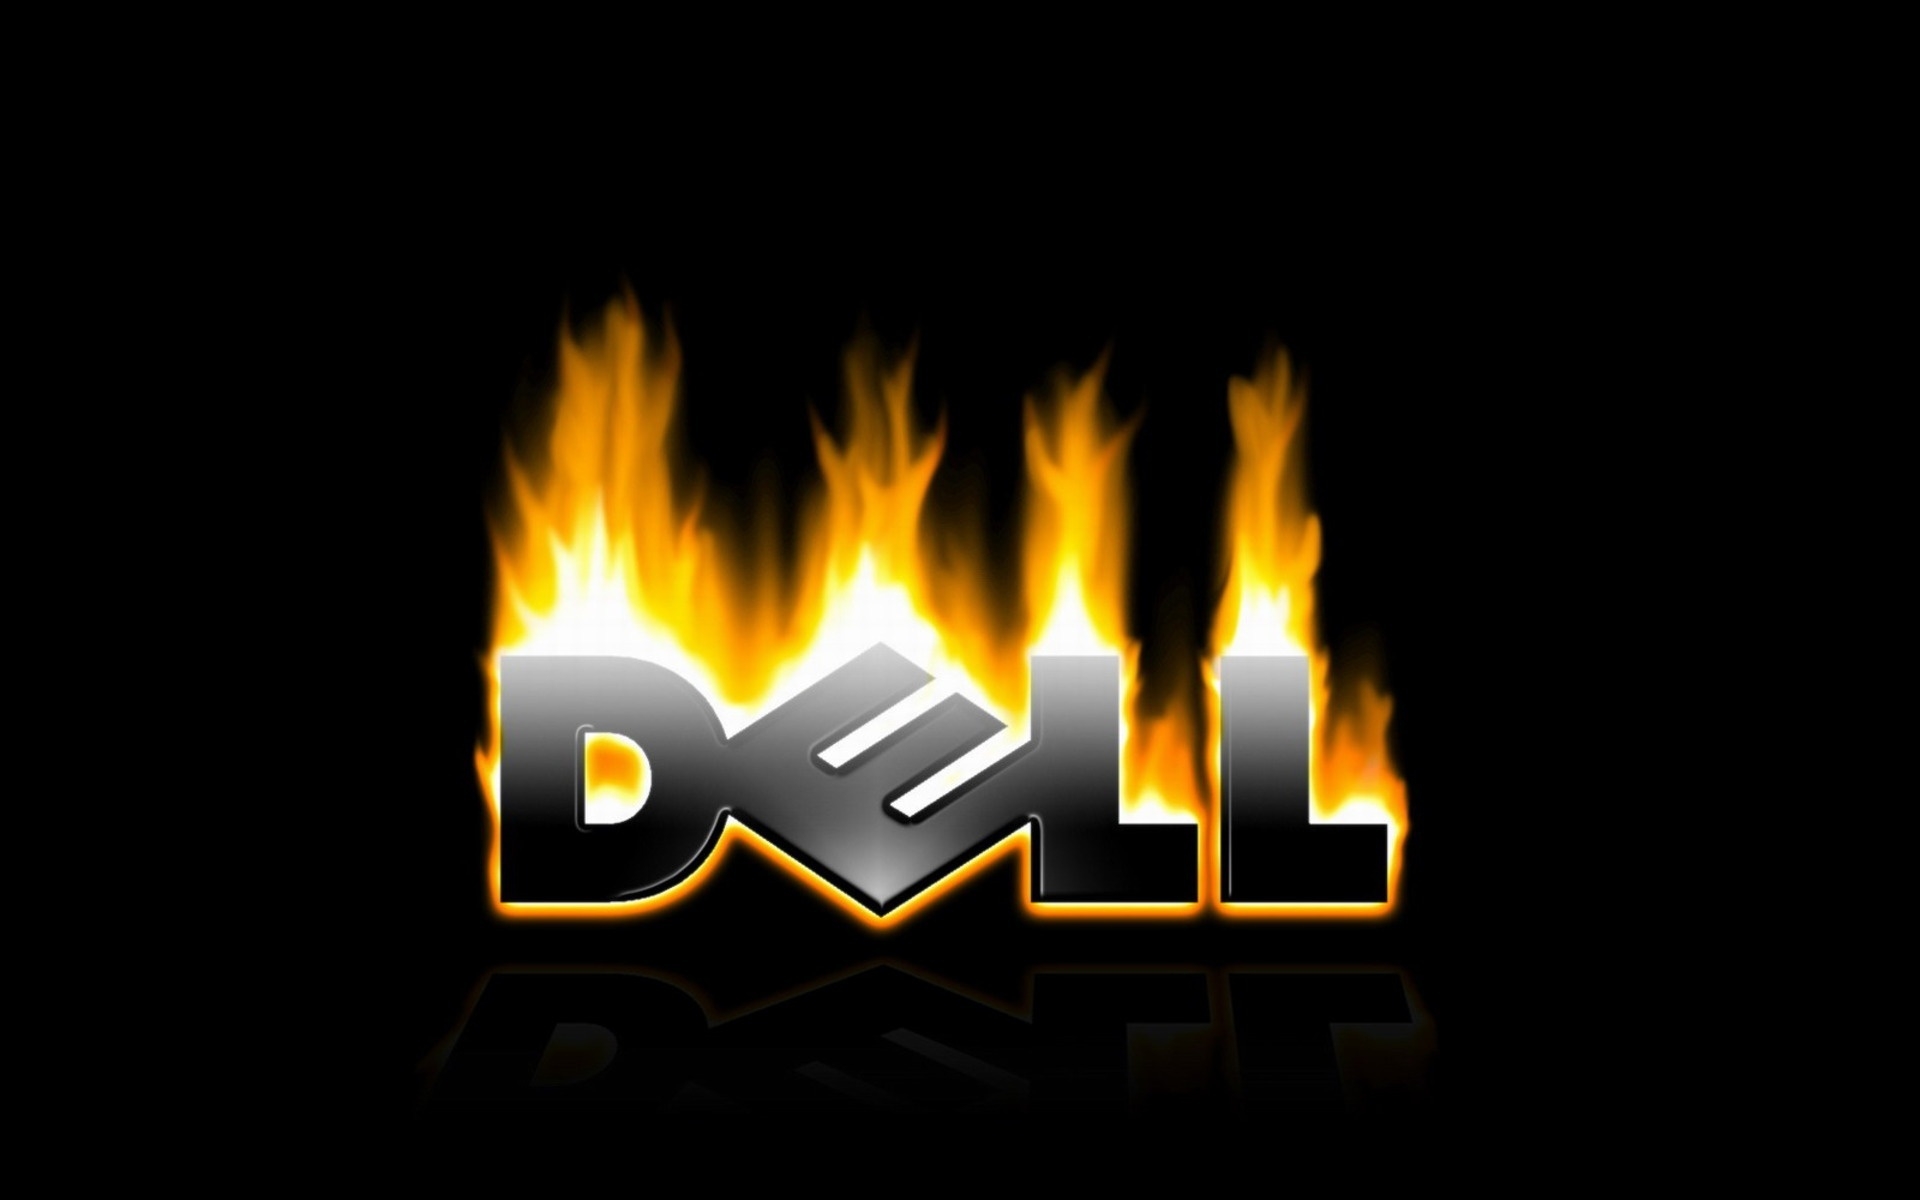 Dell in fire for 1920 x 1200 widescreen resolution